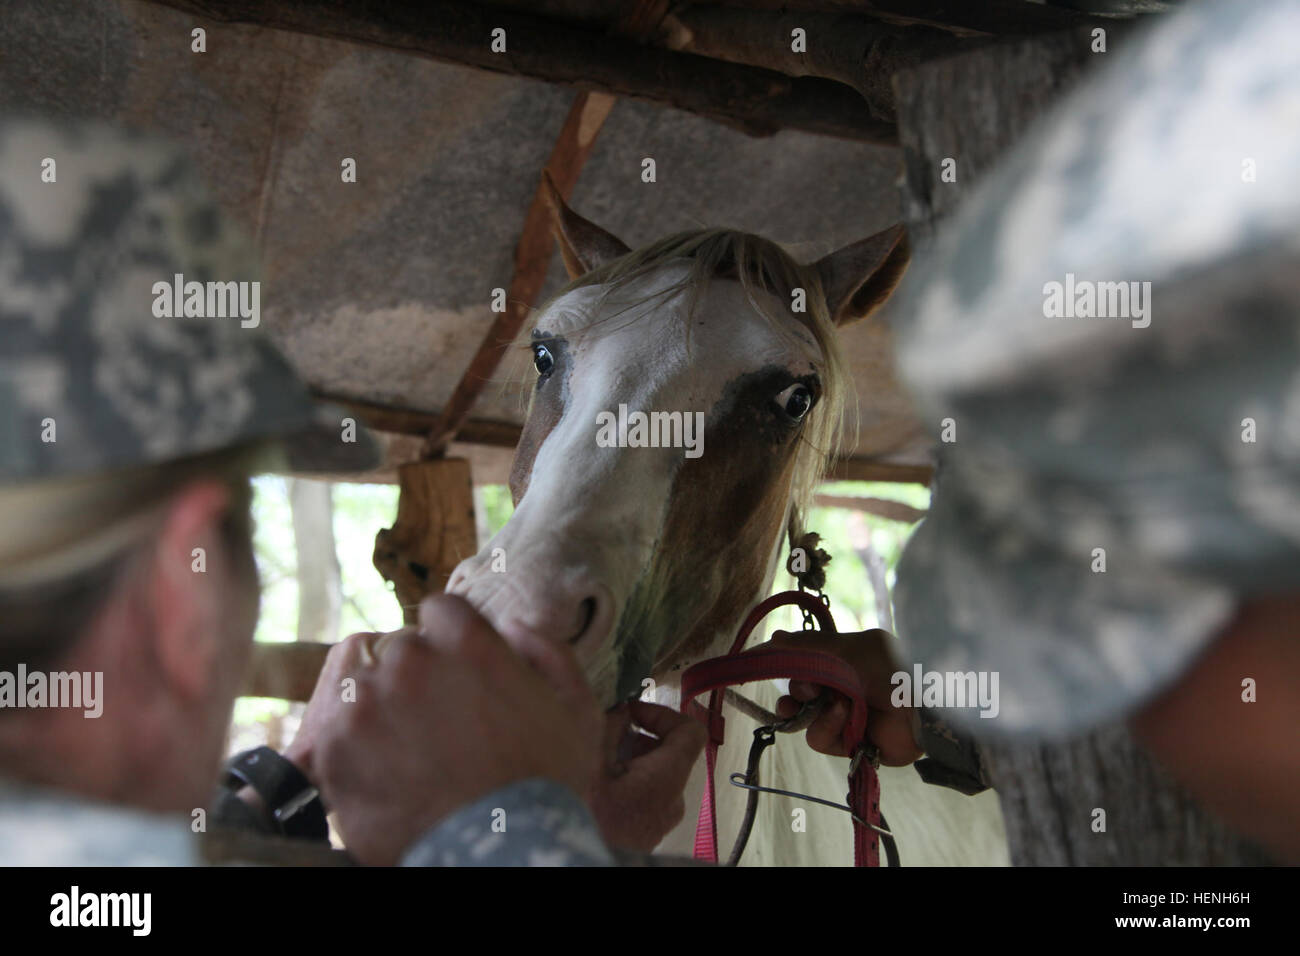 U.S. Army Maj. Victoria Smith, of the 149th Medical Detachment Veterinary Services, vaccinates a horse for a Veterinary Readiness Training Exercise during Beyond the Horizon, San Jose, Guatemala, May 25, 2015. Beyond the Horizon is an annual exercise that embraces the partnership between the United States and Guatemala, to provide focused humanitarian assistance through various medical, dental, and civic action programs. (U.S. Army photo by Pfc. Christopher Martin/Released) Beyond the Horizon 2014, Guatemala 140525-A-GA303-015 Stock Photo